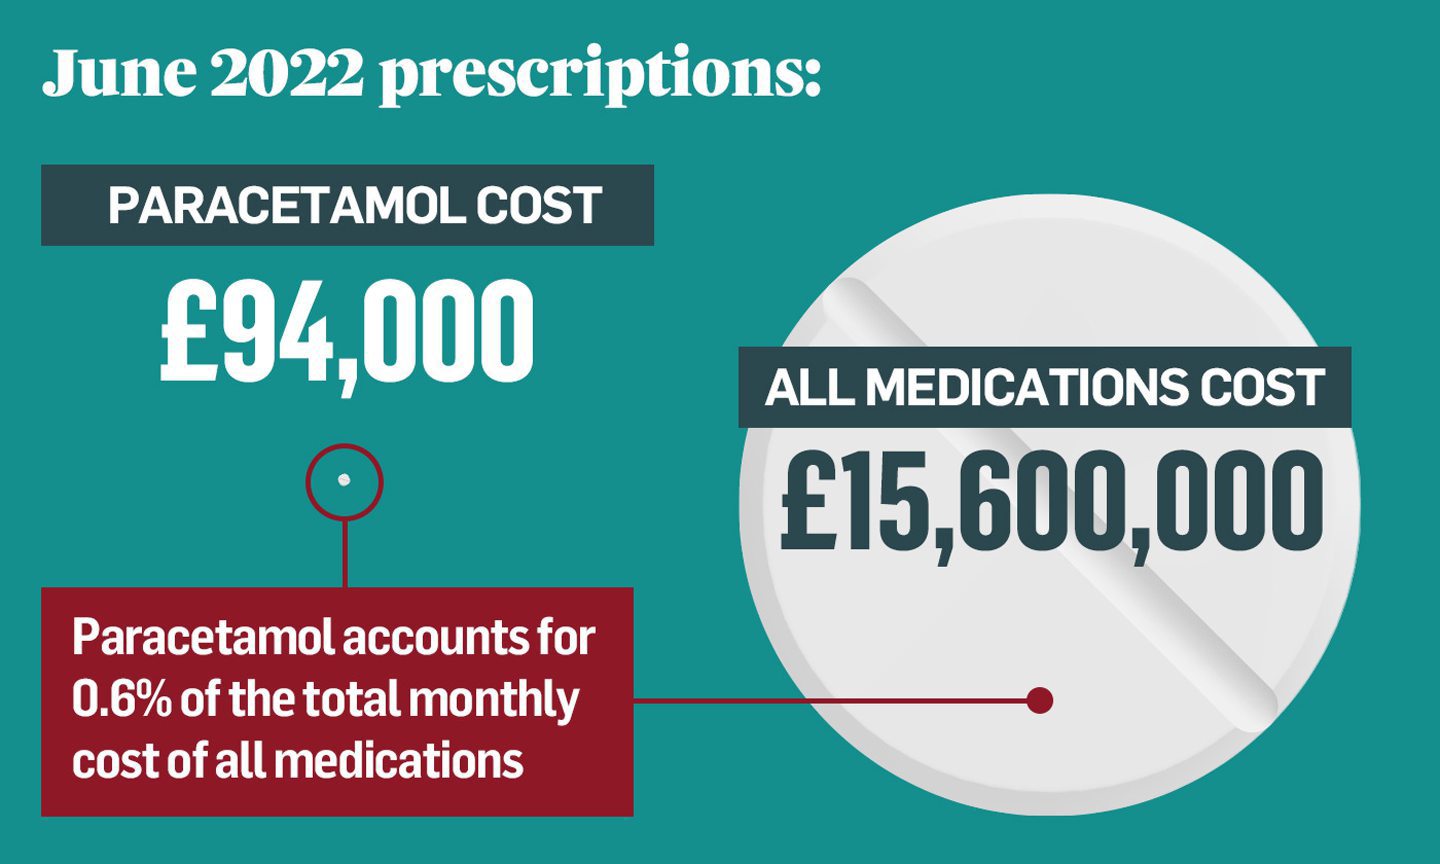 Infographic showing the cost of paracetamol prescriptions compared to all medication in June 2022